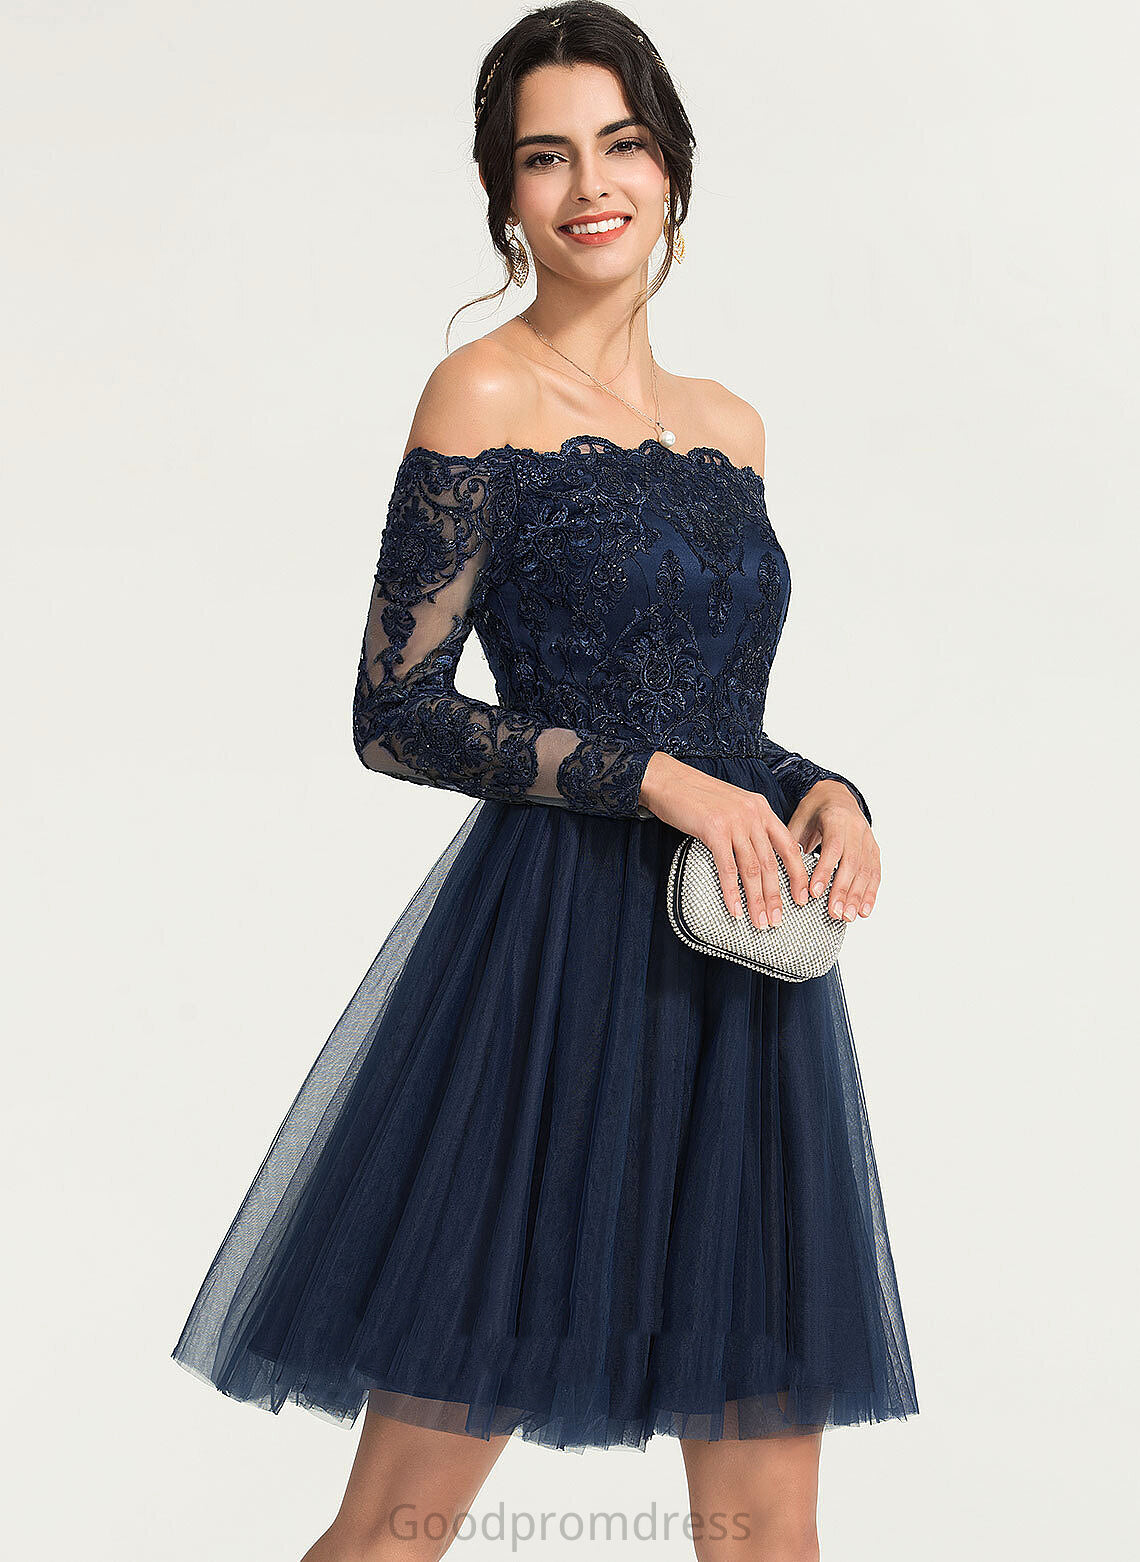 Adeline Dulce Homecoming Dresses Dresses Bridesmaid